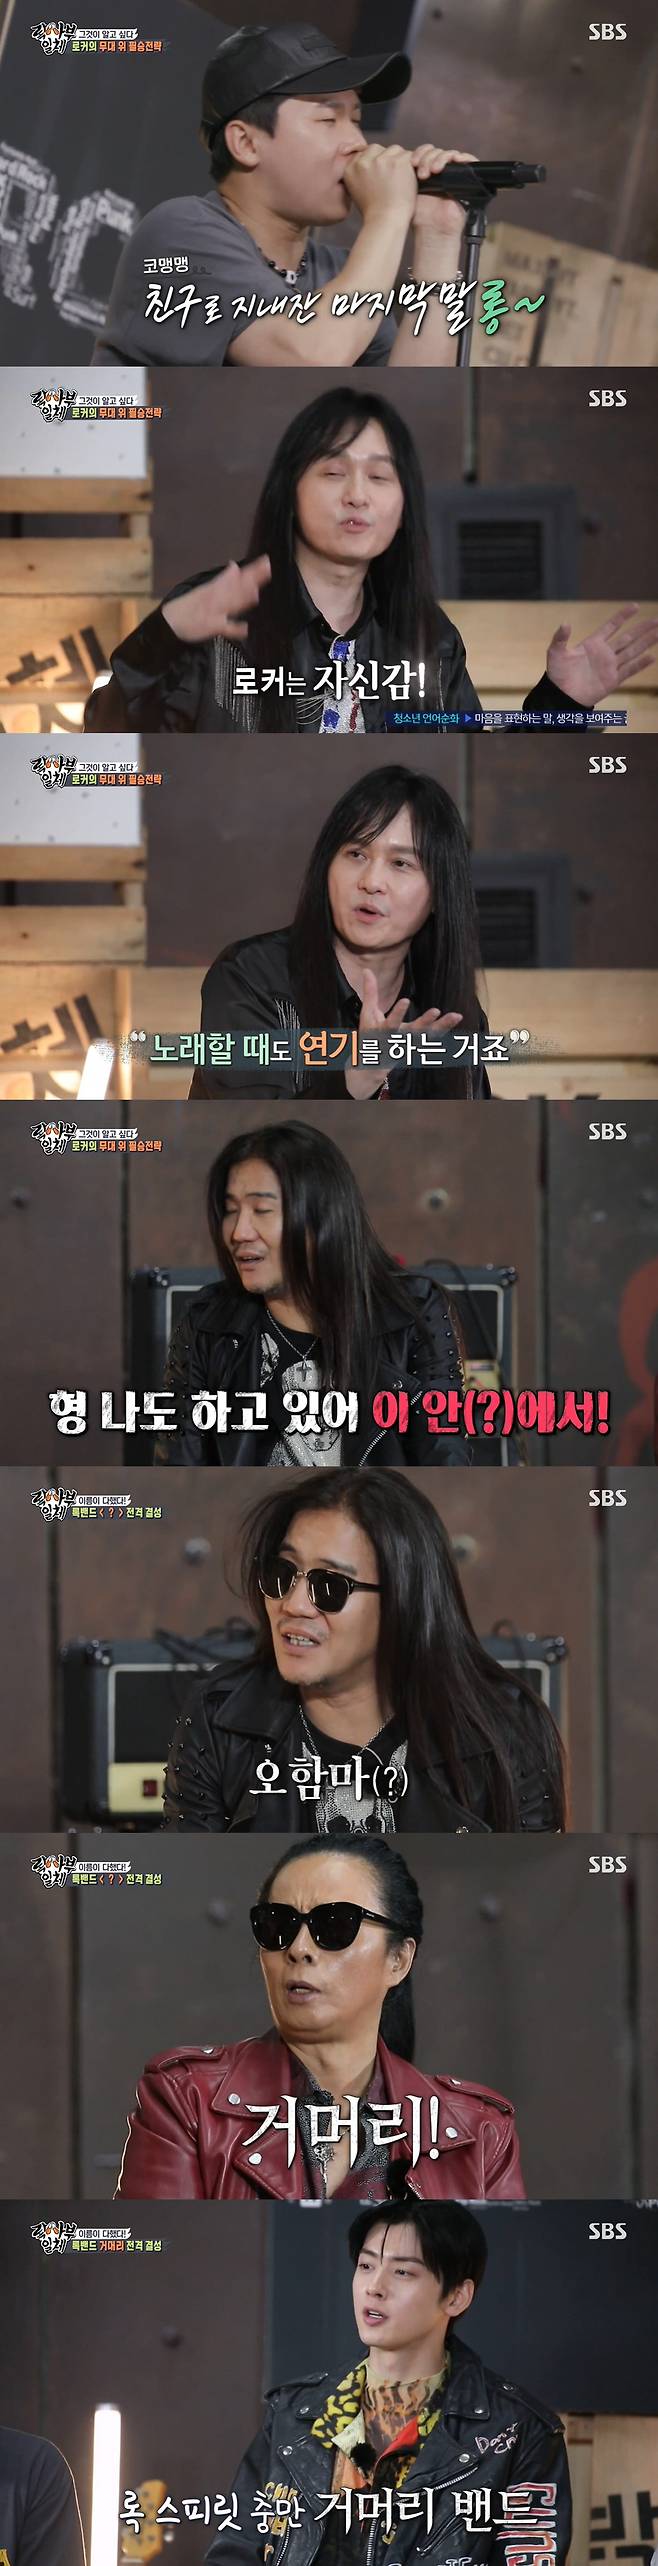 Members of All The Butlers formed and debuted the Rock Band leech.In SBS All The Butlers broadcast on the 23rd, Kim Tae-won, the leader of Koreas longest rock band Risen, and Kim Kyung-ho and Park Wan-kyu, who are holding the Korean rocker system with emotion and soul,Lee Seung-gi said, It is Idol in high school. I grew up listening to Kim Kyung-hos music. It is a generation that grew up listening to rock.Kim Kyung-ho said, The rock spirit we have is resistance, freedom, peace, but nowadays we are happily singing with many compromises with society.Theres a lot of resistance gone, he said, laughing.The masters, who are sorry for the festival culture that has stagnated with Corona 19, prepared an untapped stage to enjoy with rock band juniors.At this time, the masters released secrets such as performances and facial expressions that bent the audience for the rock festival.Kim Kyung-ho said: Rocker is confident - the stage protagonist is me.The reason why I do not use sunglasses on stage is to act when I sing. At this time, Park Wan-kyu took off his sunglasses and laughed at him saying, I am doing it. Park Wan-kyu said, When I was in high school, my band name was Ohamma; some friends were cyanide, while Kim Tae-won said, How about Minari?How about an animal leech in Minari? Five hours before the performance, the members headed to the practice room for a band concert rehearsal.Lee Seung-gi is a song that I want to sing with my master. I feel so good to sing together. Kim Kyung-hos I loved you and Park Wan-kyus Millennial Love decided to practice and decide.Lee Seung-gi was immersed with all her heart, and Kim Kyung-ho praised her for really singing well.In particular, Lee Seung-gi exploded his school district in front of Idol as a child.Kim Dong-Hyun and Cha Jung Eun-woo chose Risens Never Ending Kahaani, while Yang Se-hyeong practiced Bon Jovis lts my life.In this process, Kim Dong-Hyun laughed when he said, I just need to care about the beat.In addition, Yang Se-hyeong showed off the spirit of the inherent rock star.Meanwhile, the leech band made its debut that evening.Lee Seung-gi said, Many people are very hard, as the performance industry is almost devastated by Corona 19.I have not been performing for six months, and I am filling my negative income with part-time jobs, said One Button Band. It seems to be the saddest thing that my mind is shaking.Kim Tae-won said, People who are playing music should be loved to get energy. Please Risen.Kim Kyung-ho and Park Wan-kyu exploded the rock spirit that was sealed as Shout, and Kim Tae-won showed off his guitar skills with 4.1.9 Elephant Escape.Park Wan-kyu, Jung Eun-woo, Kim Dong-Hyuns Never Ending Kahaani, Yang Se-hyeong, who turned into a brewing cost, and Park Wan-kyus lts my life stage.The Duets stage of Kim Kyung-ho and Lee Seung-gi was also unveiled; Lee Seung-gi said, This stage is special.In high school, Kim Kyung-ho sang and sang while singing and became a singer. There is comfort and warmth that you give.I think that many people will be hard to remember those days when I was comforted, but I hope it will be a time to be happy and healing for a while. Kim Kyung-ho and Lee Seung-gi loved, Kim Kyung-ho and Park Wan-kyu and Lee Seung-gi showed off their rock spirits by singing Millennium Love and Forbidden Love.